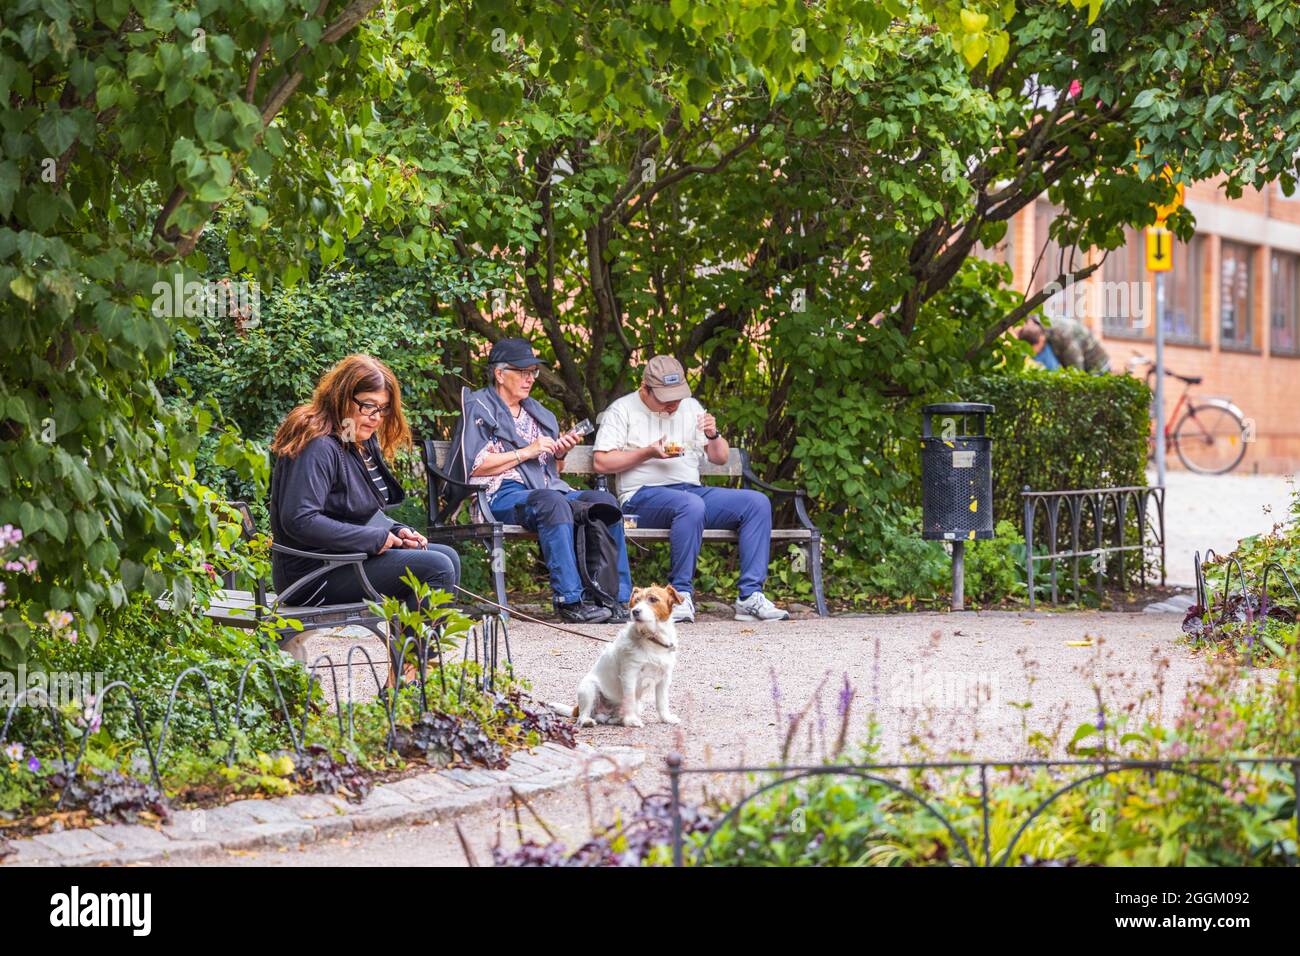 View of two men and woman with dog on benches in green city park. Stock Photo